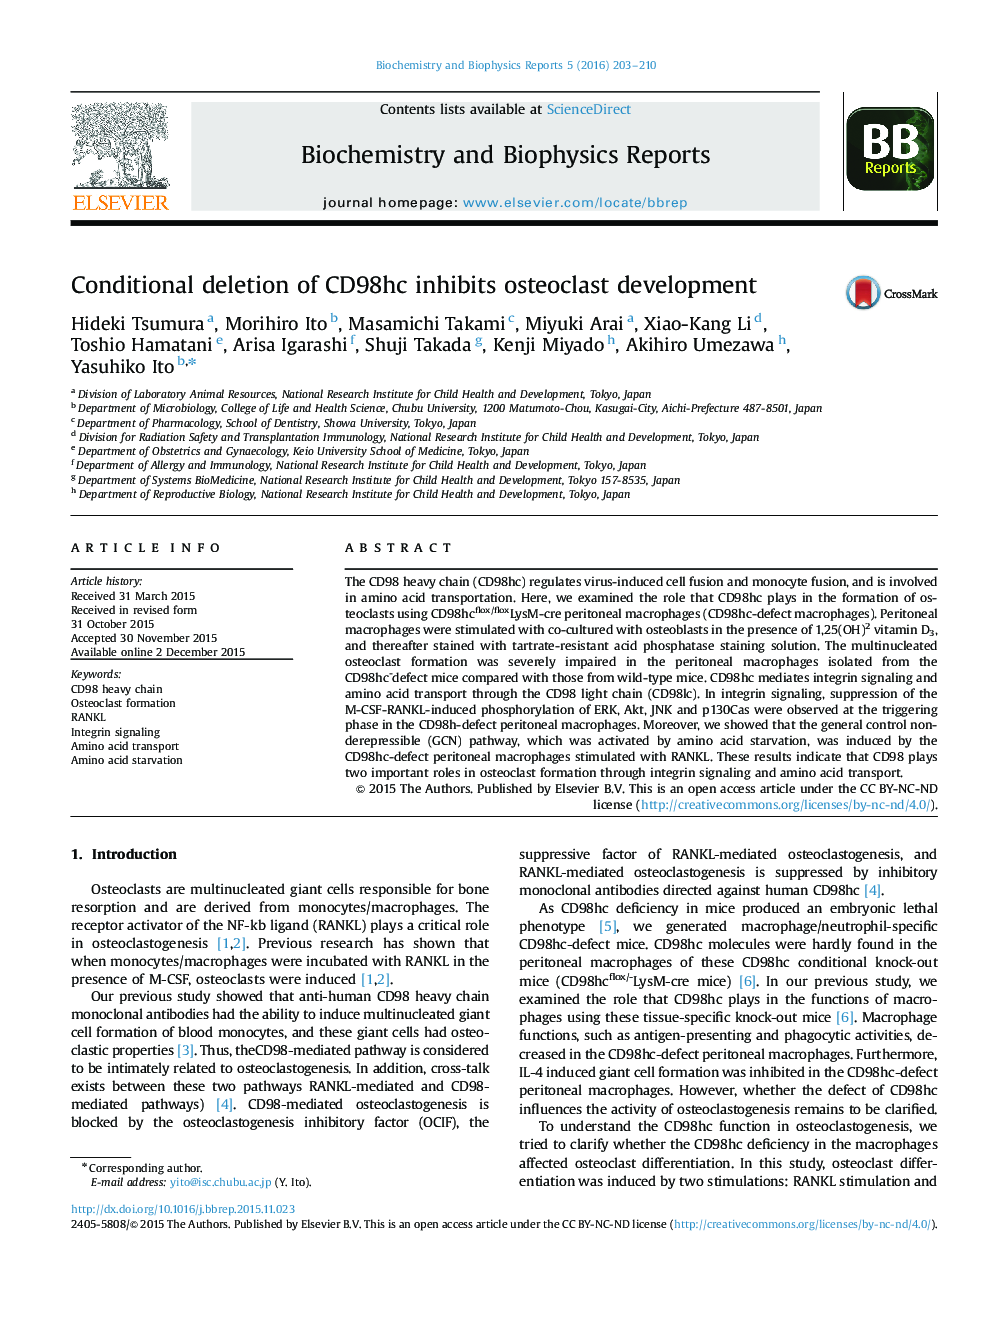 Conditional deletion of CD98hc inhibits osteoclast development